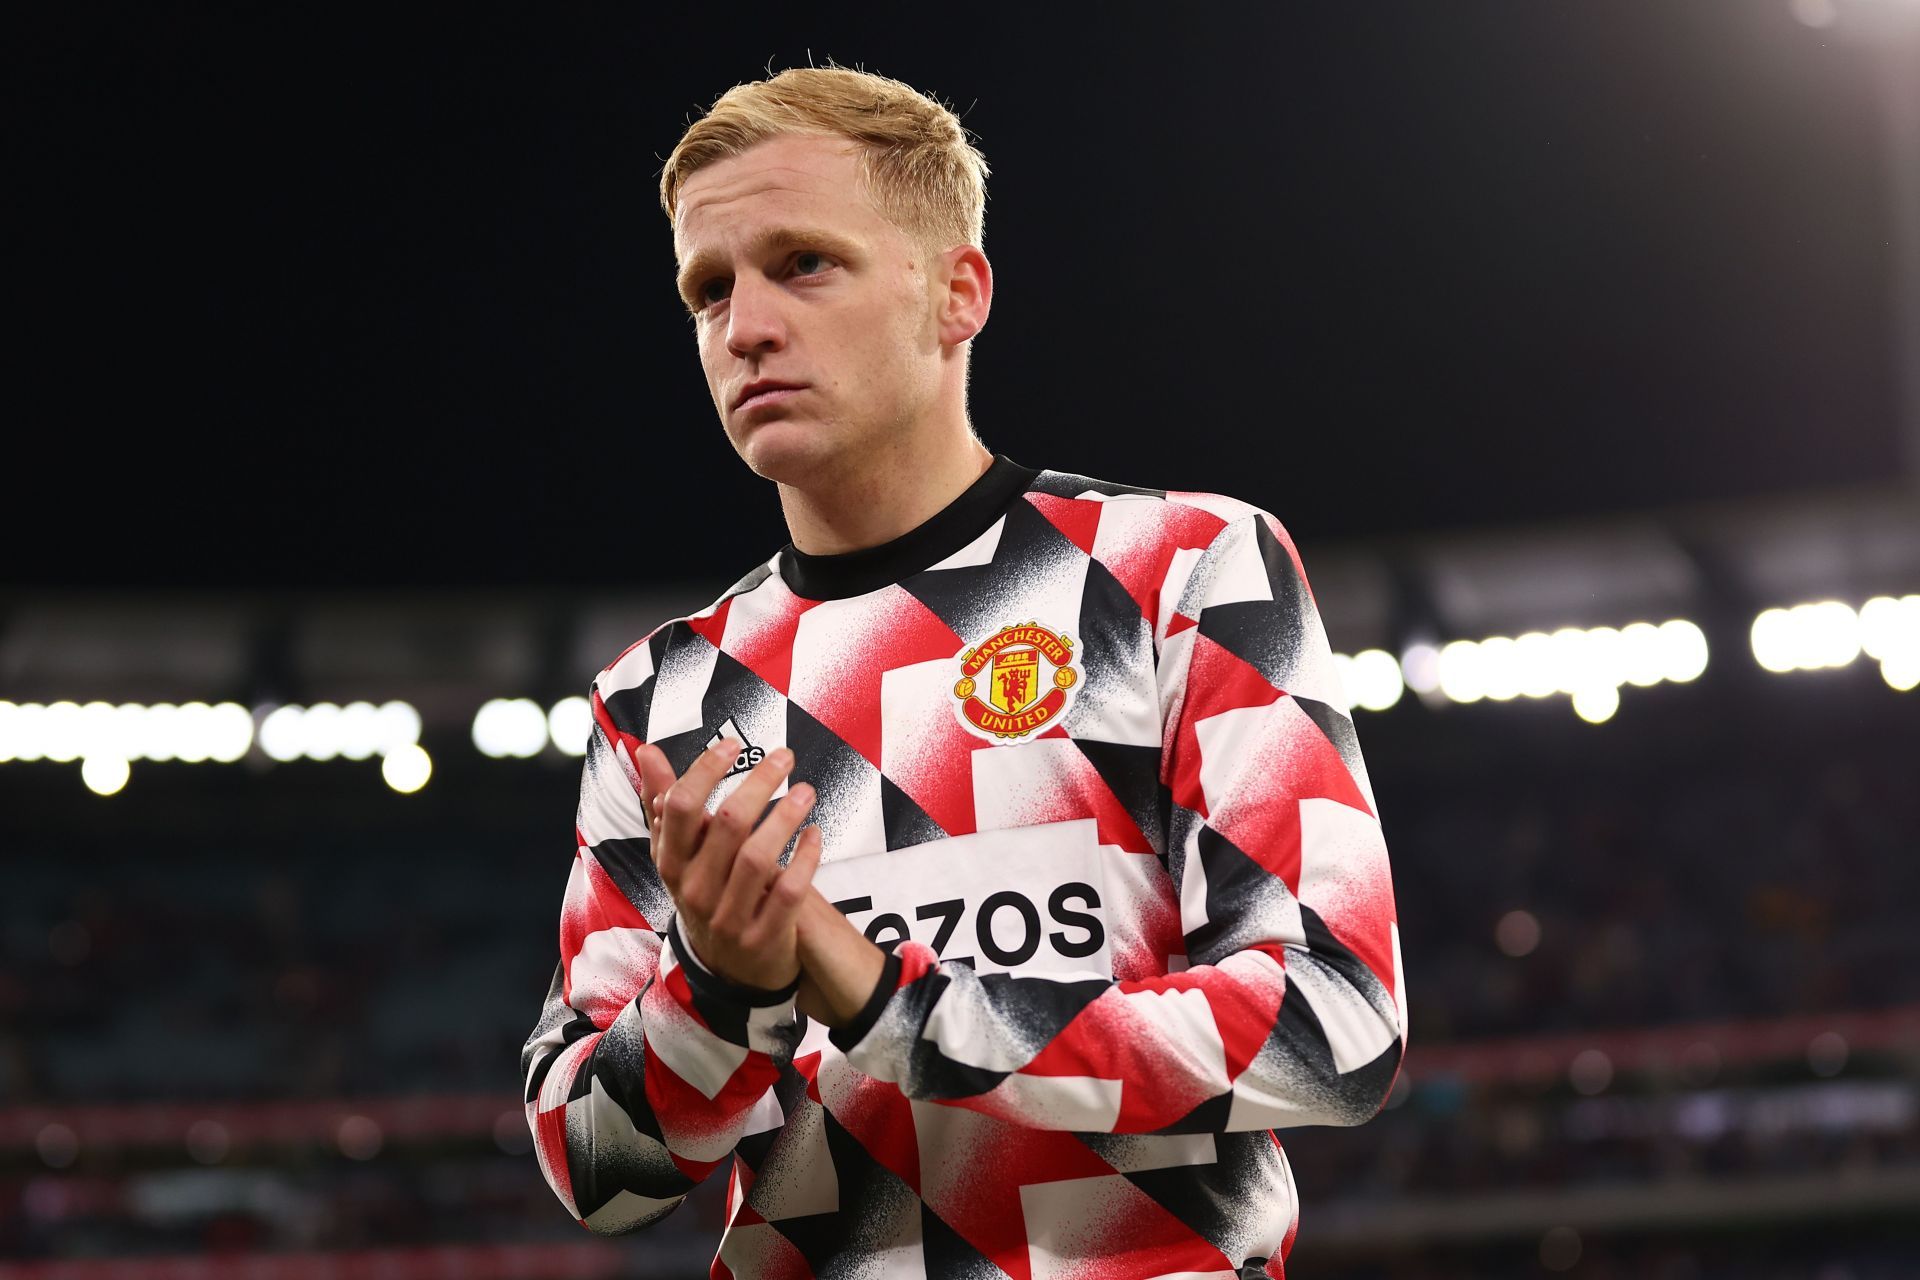 Donny van de Beek during the warm-up session ahead of the pre-season friendly against Aston Villa